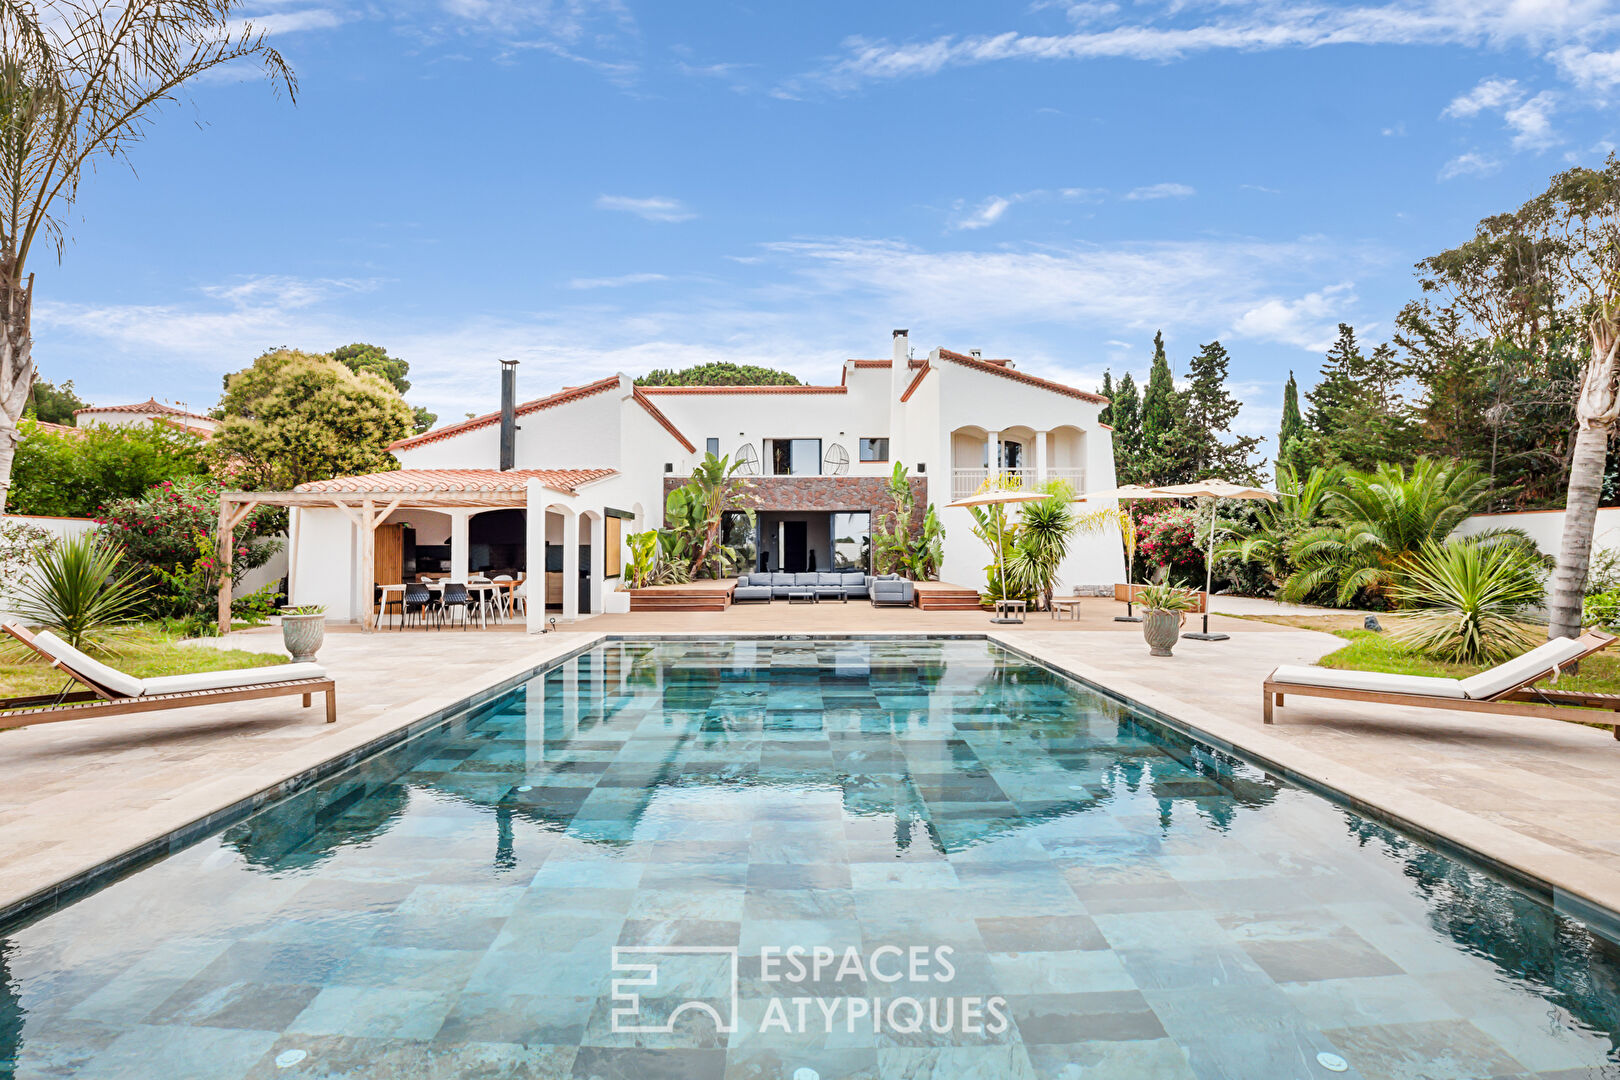 A luxurious family villa in a popular area